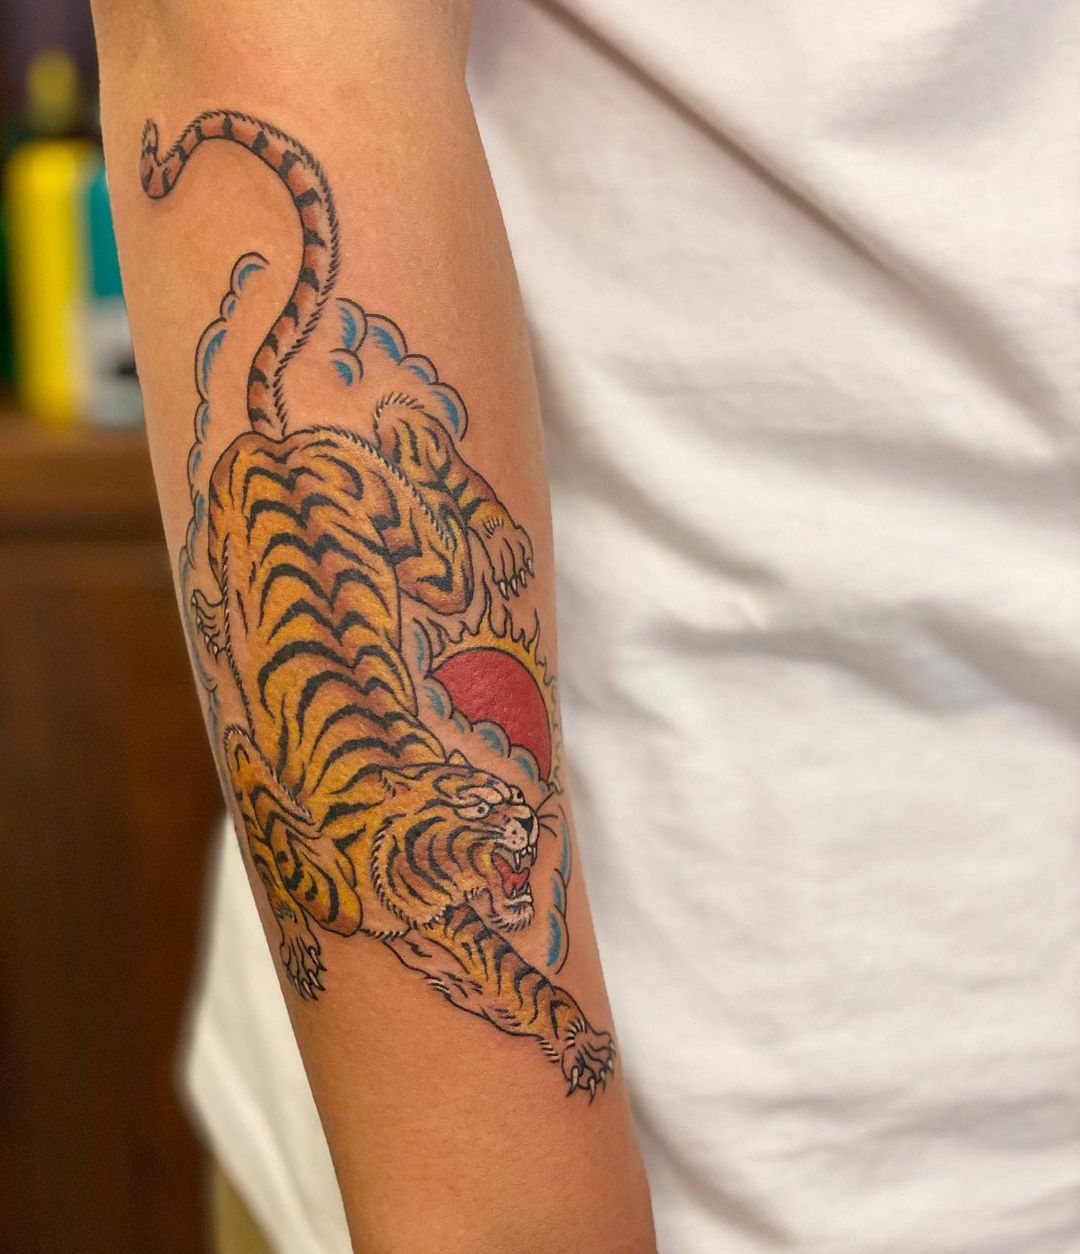 Tiger Tattoo Ideas You Need To Inspire You  Tattoo Stylist